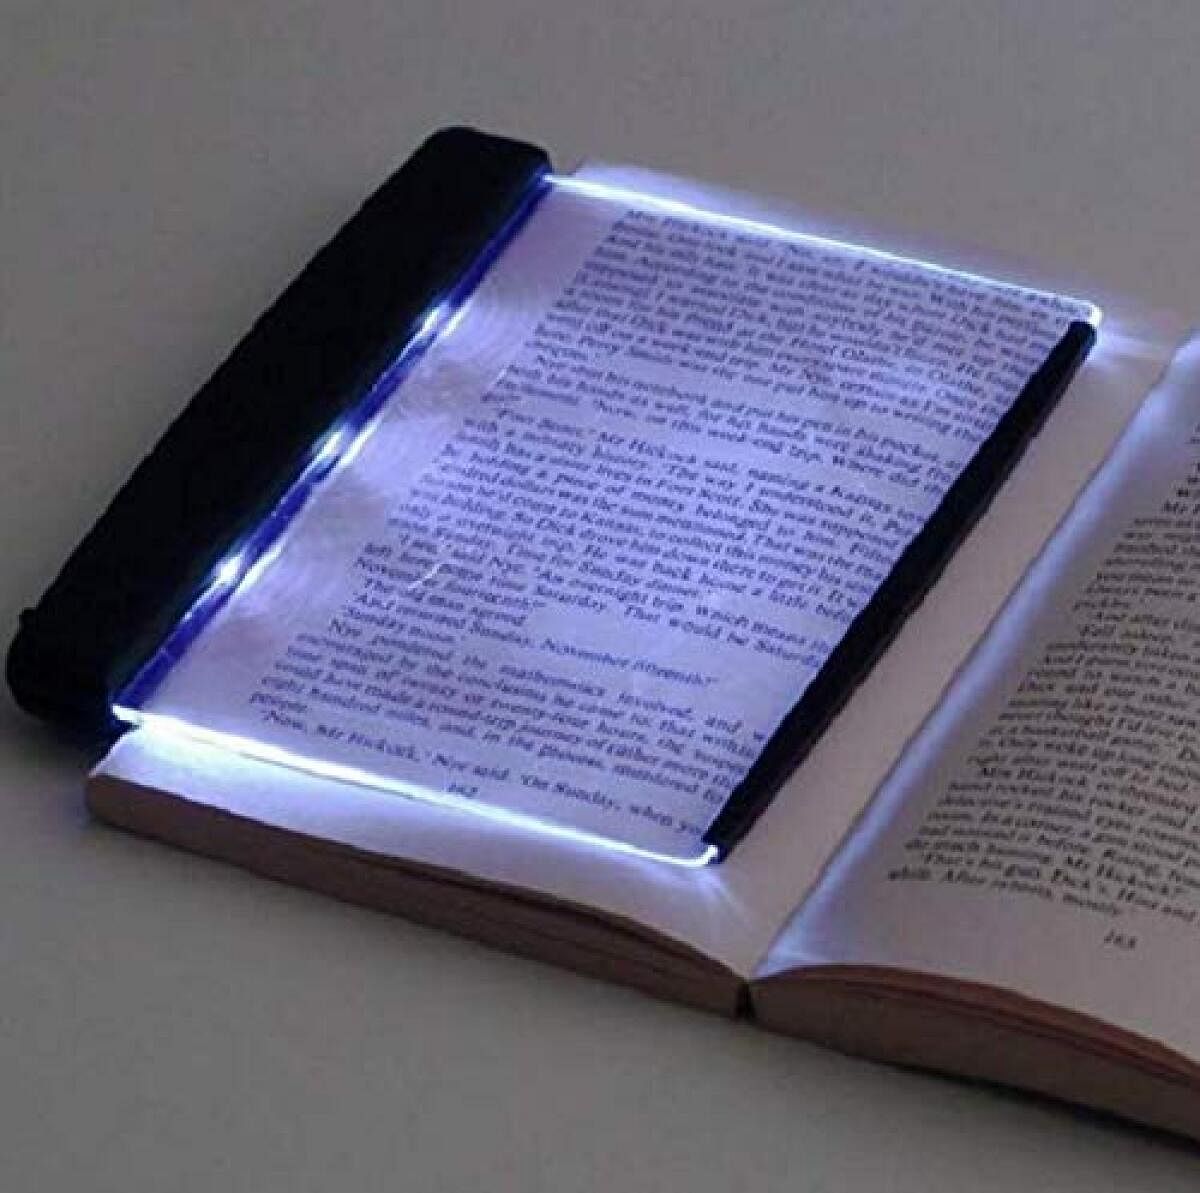 6 gadgets for bookworms